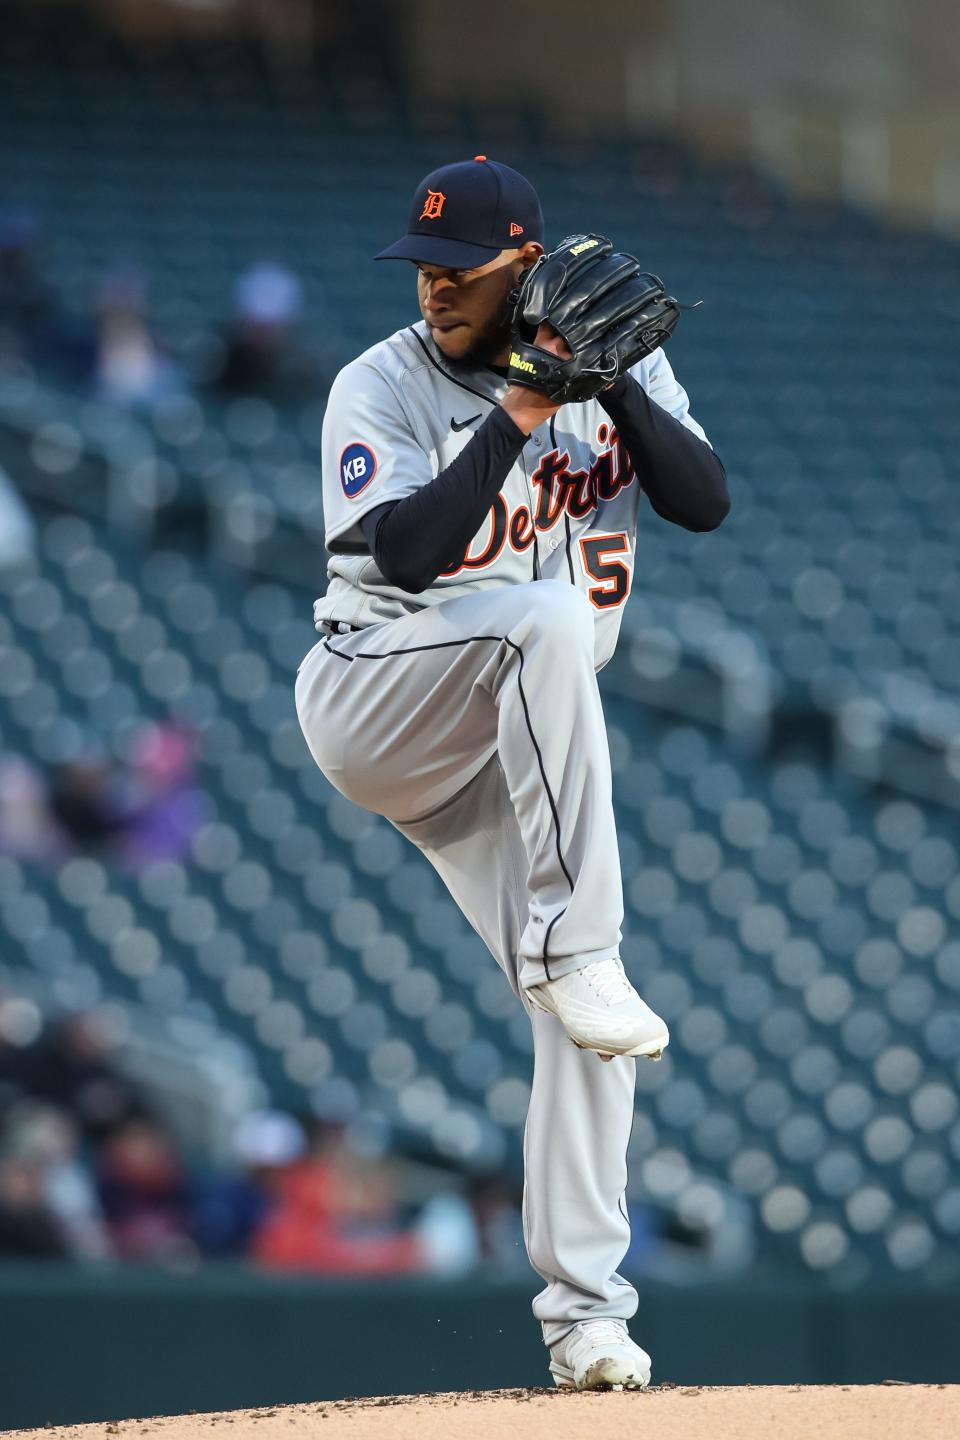 Tigers pitcher Eduardo Rodriguez delivers a pitch against the Twins in the first inning on Tuesday, April 26, 2022, in Minneapolis.